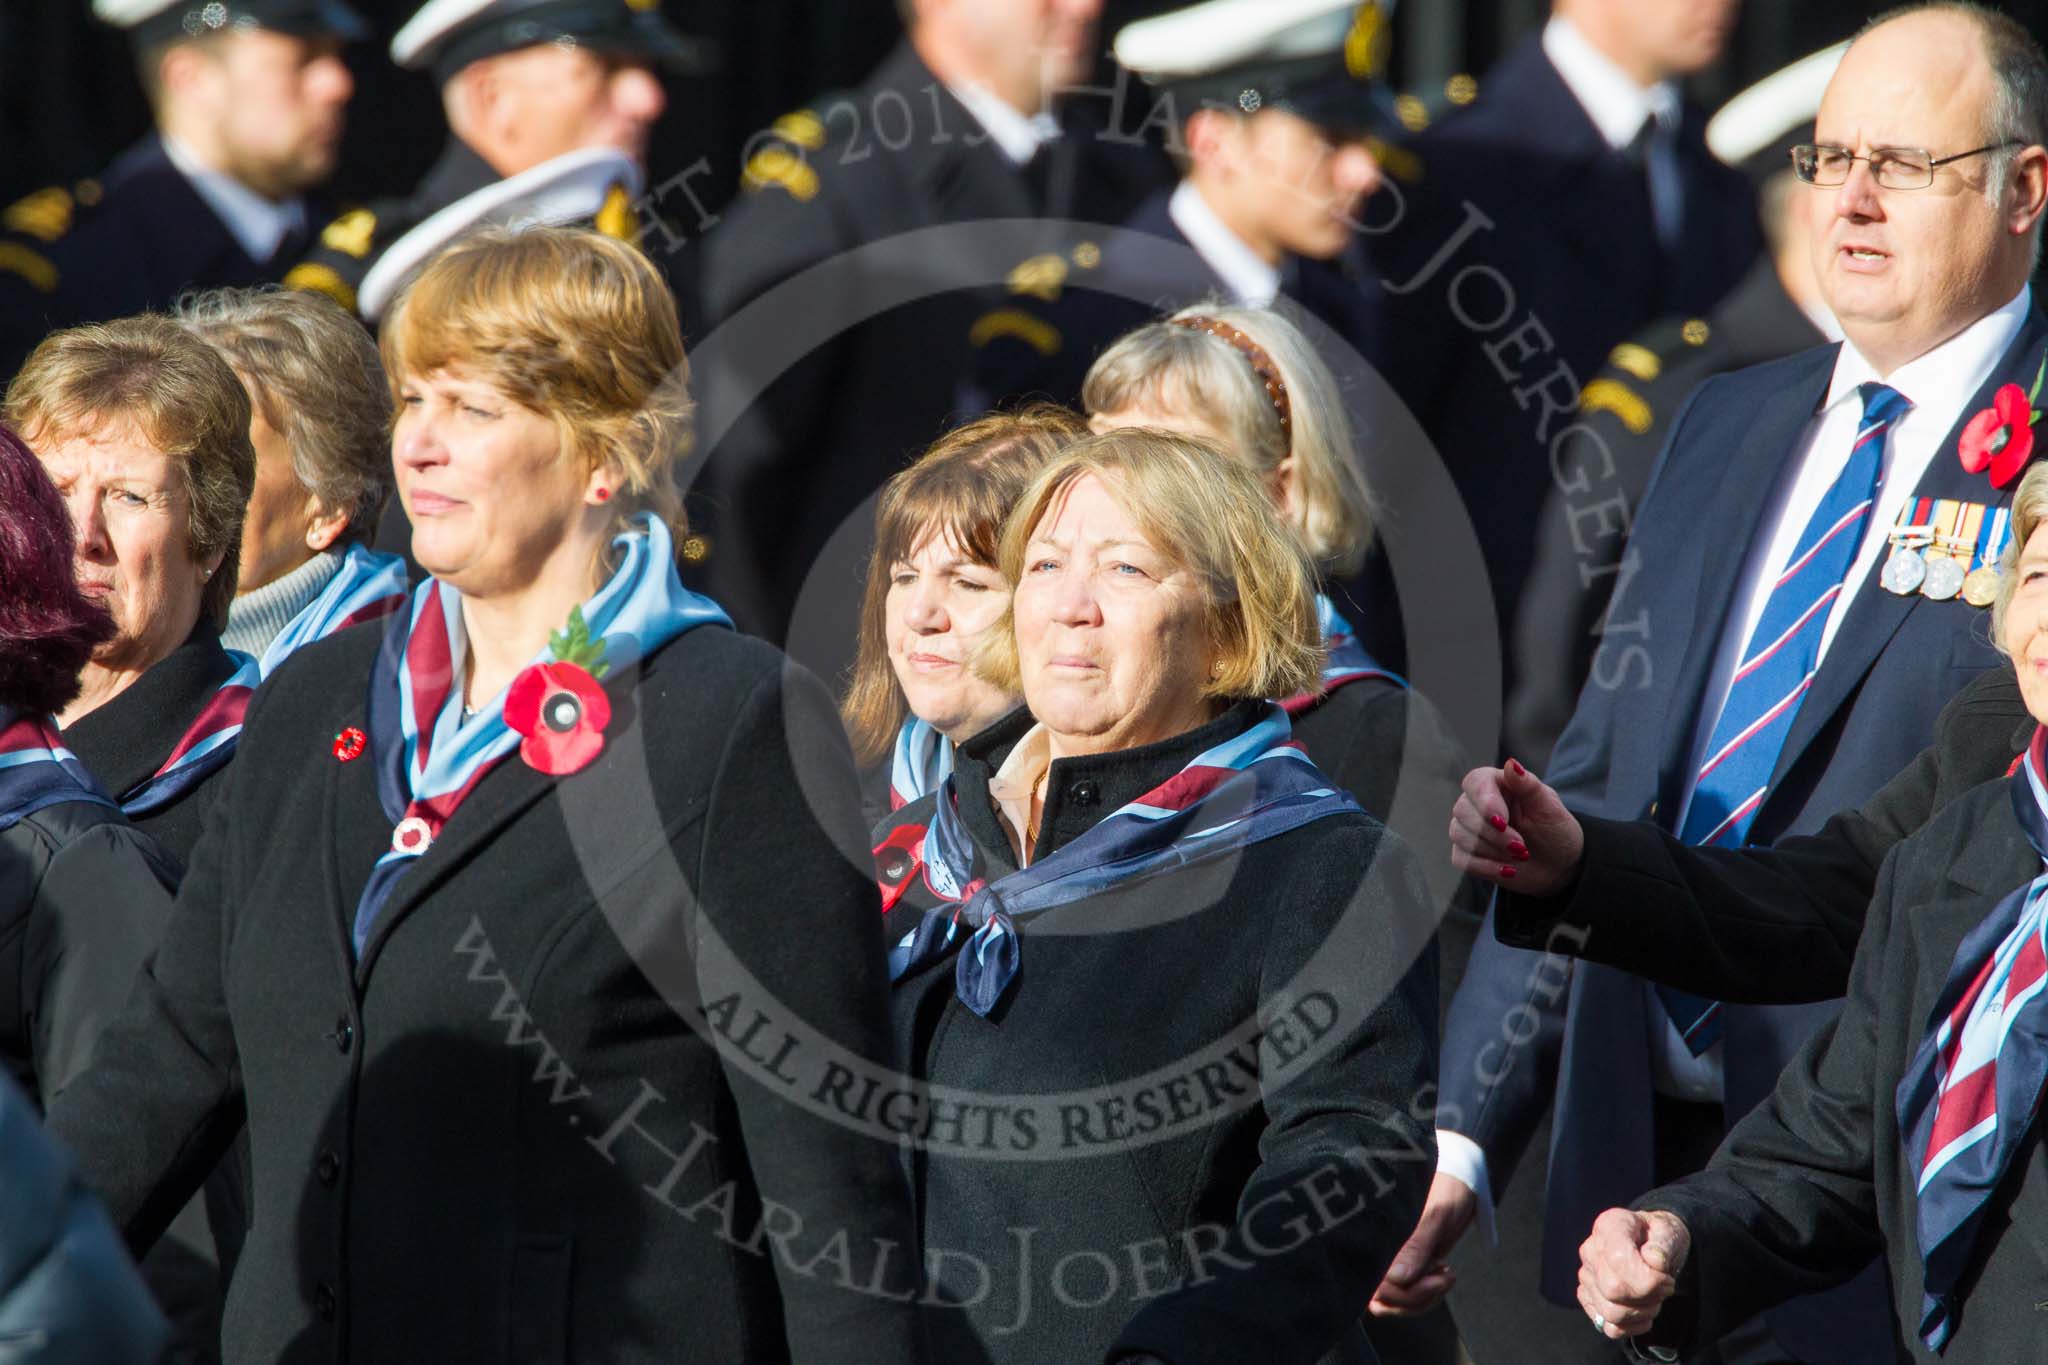 Remembrance Sunday at the Cenotaph in London 2014: Group C23 - Princess Mary's Royal Air Force Nursing Service
Association.
Press stand opposite the Foreign Office building, Whitehall, London SW1,
London,
Greater London,
United Kingdom,
on 09 November 2014 at 11:41, image #197